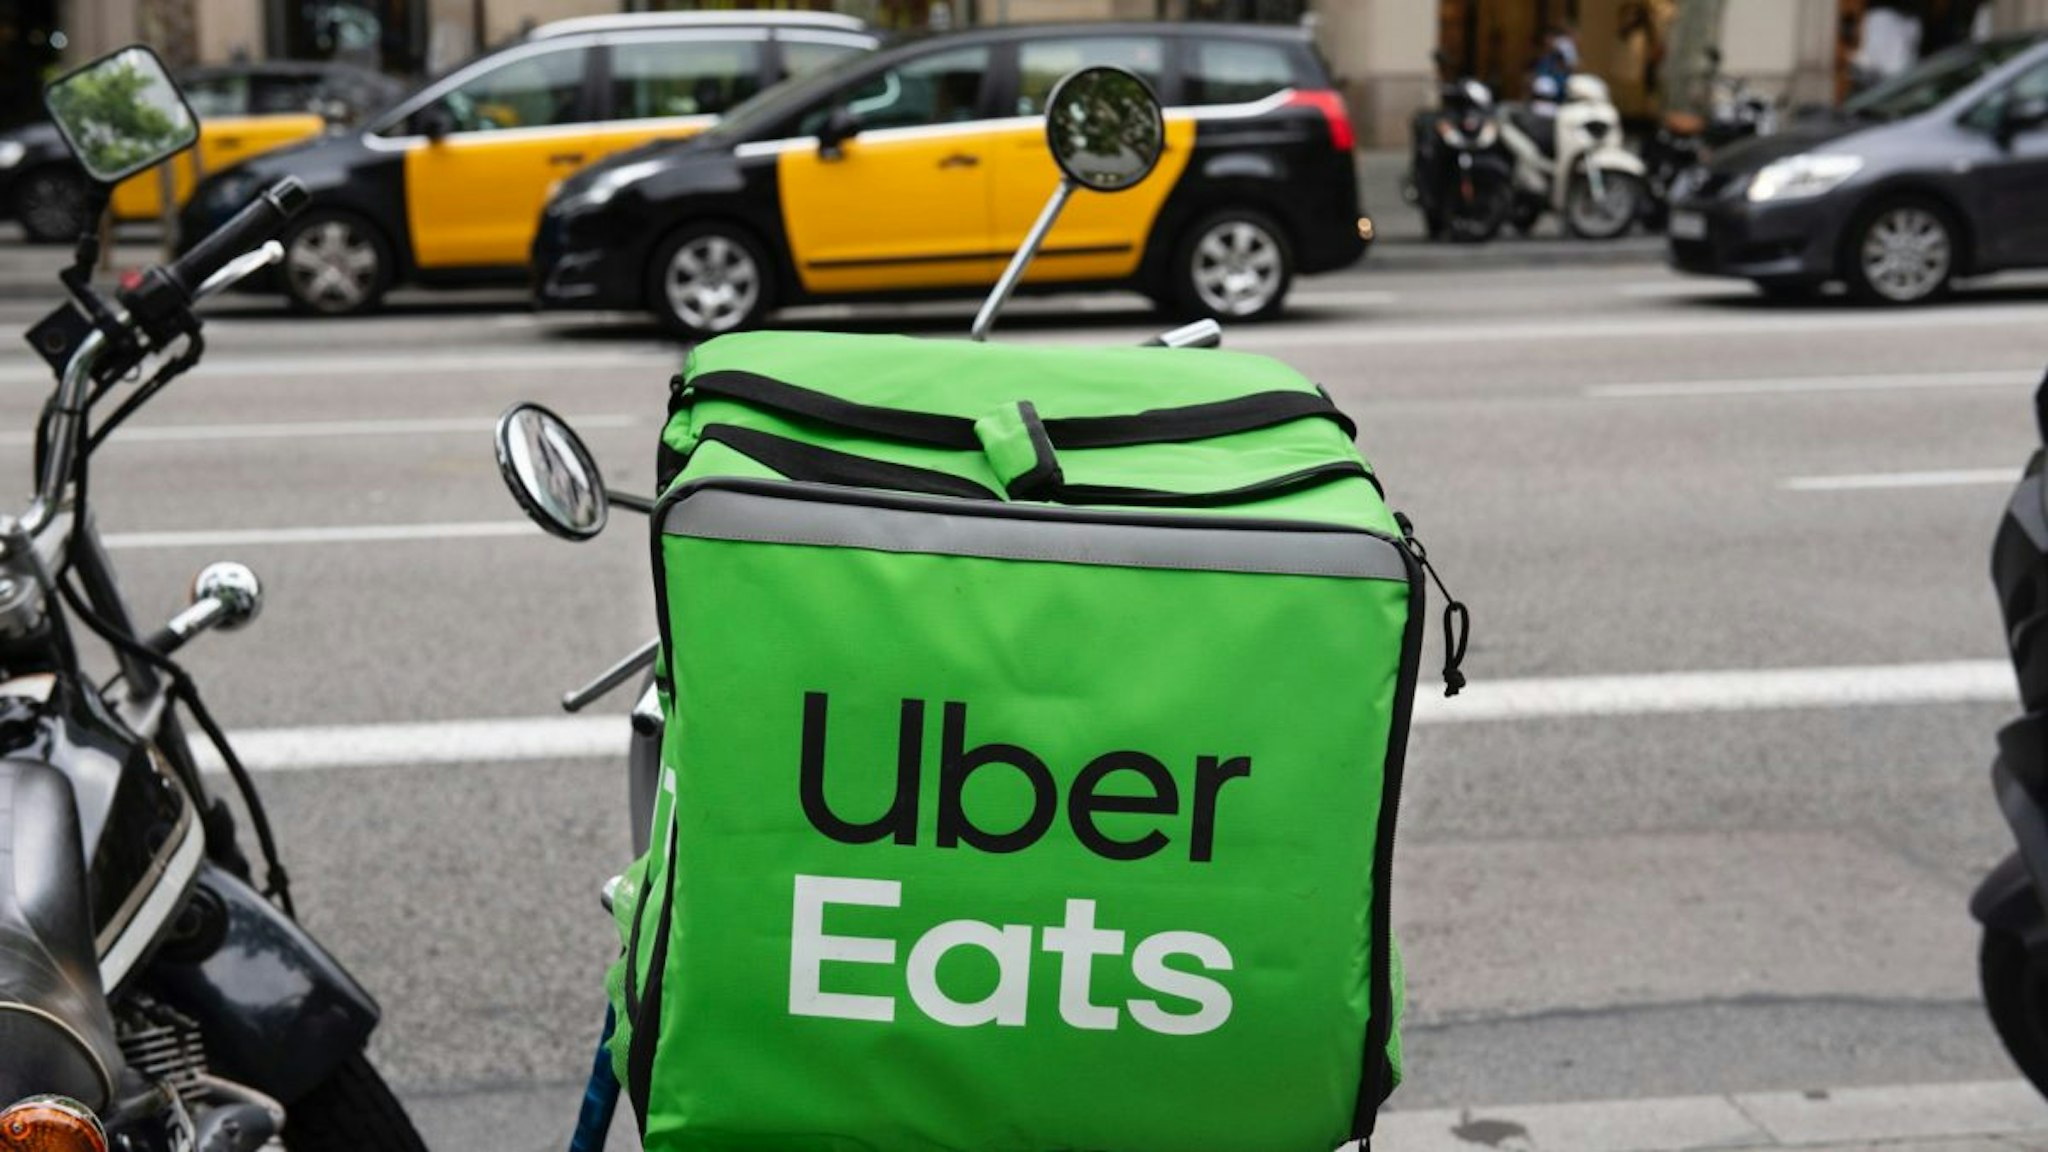 American online food ordering and delivery platform launched by Uber, Uber Eats, logo on a bicycle in Barcelona.